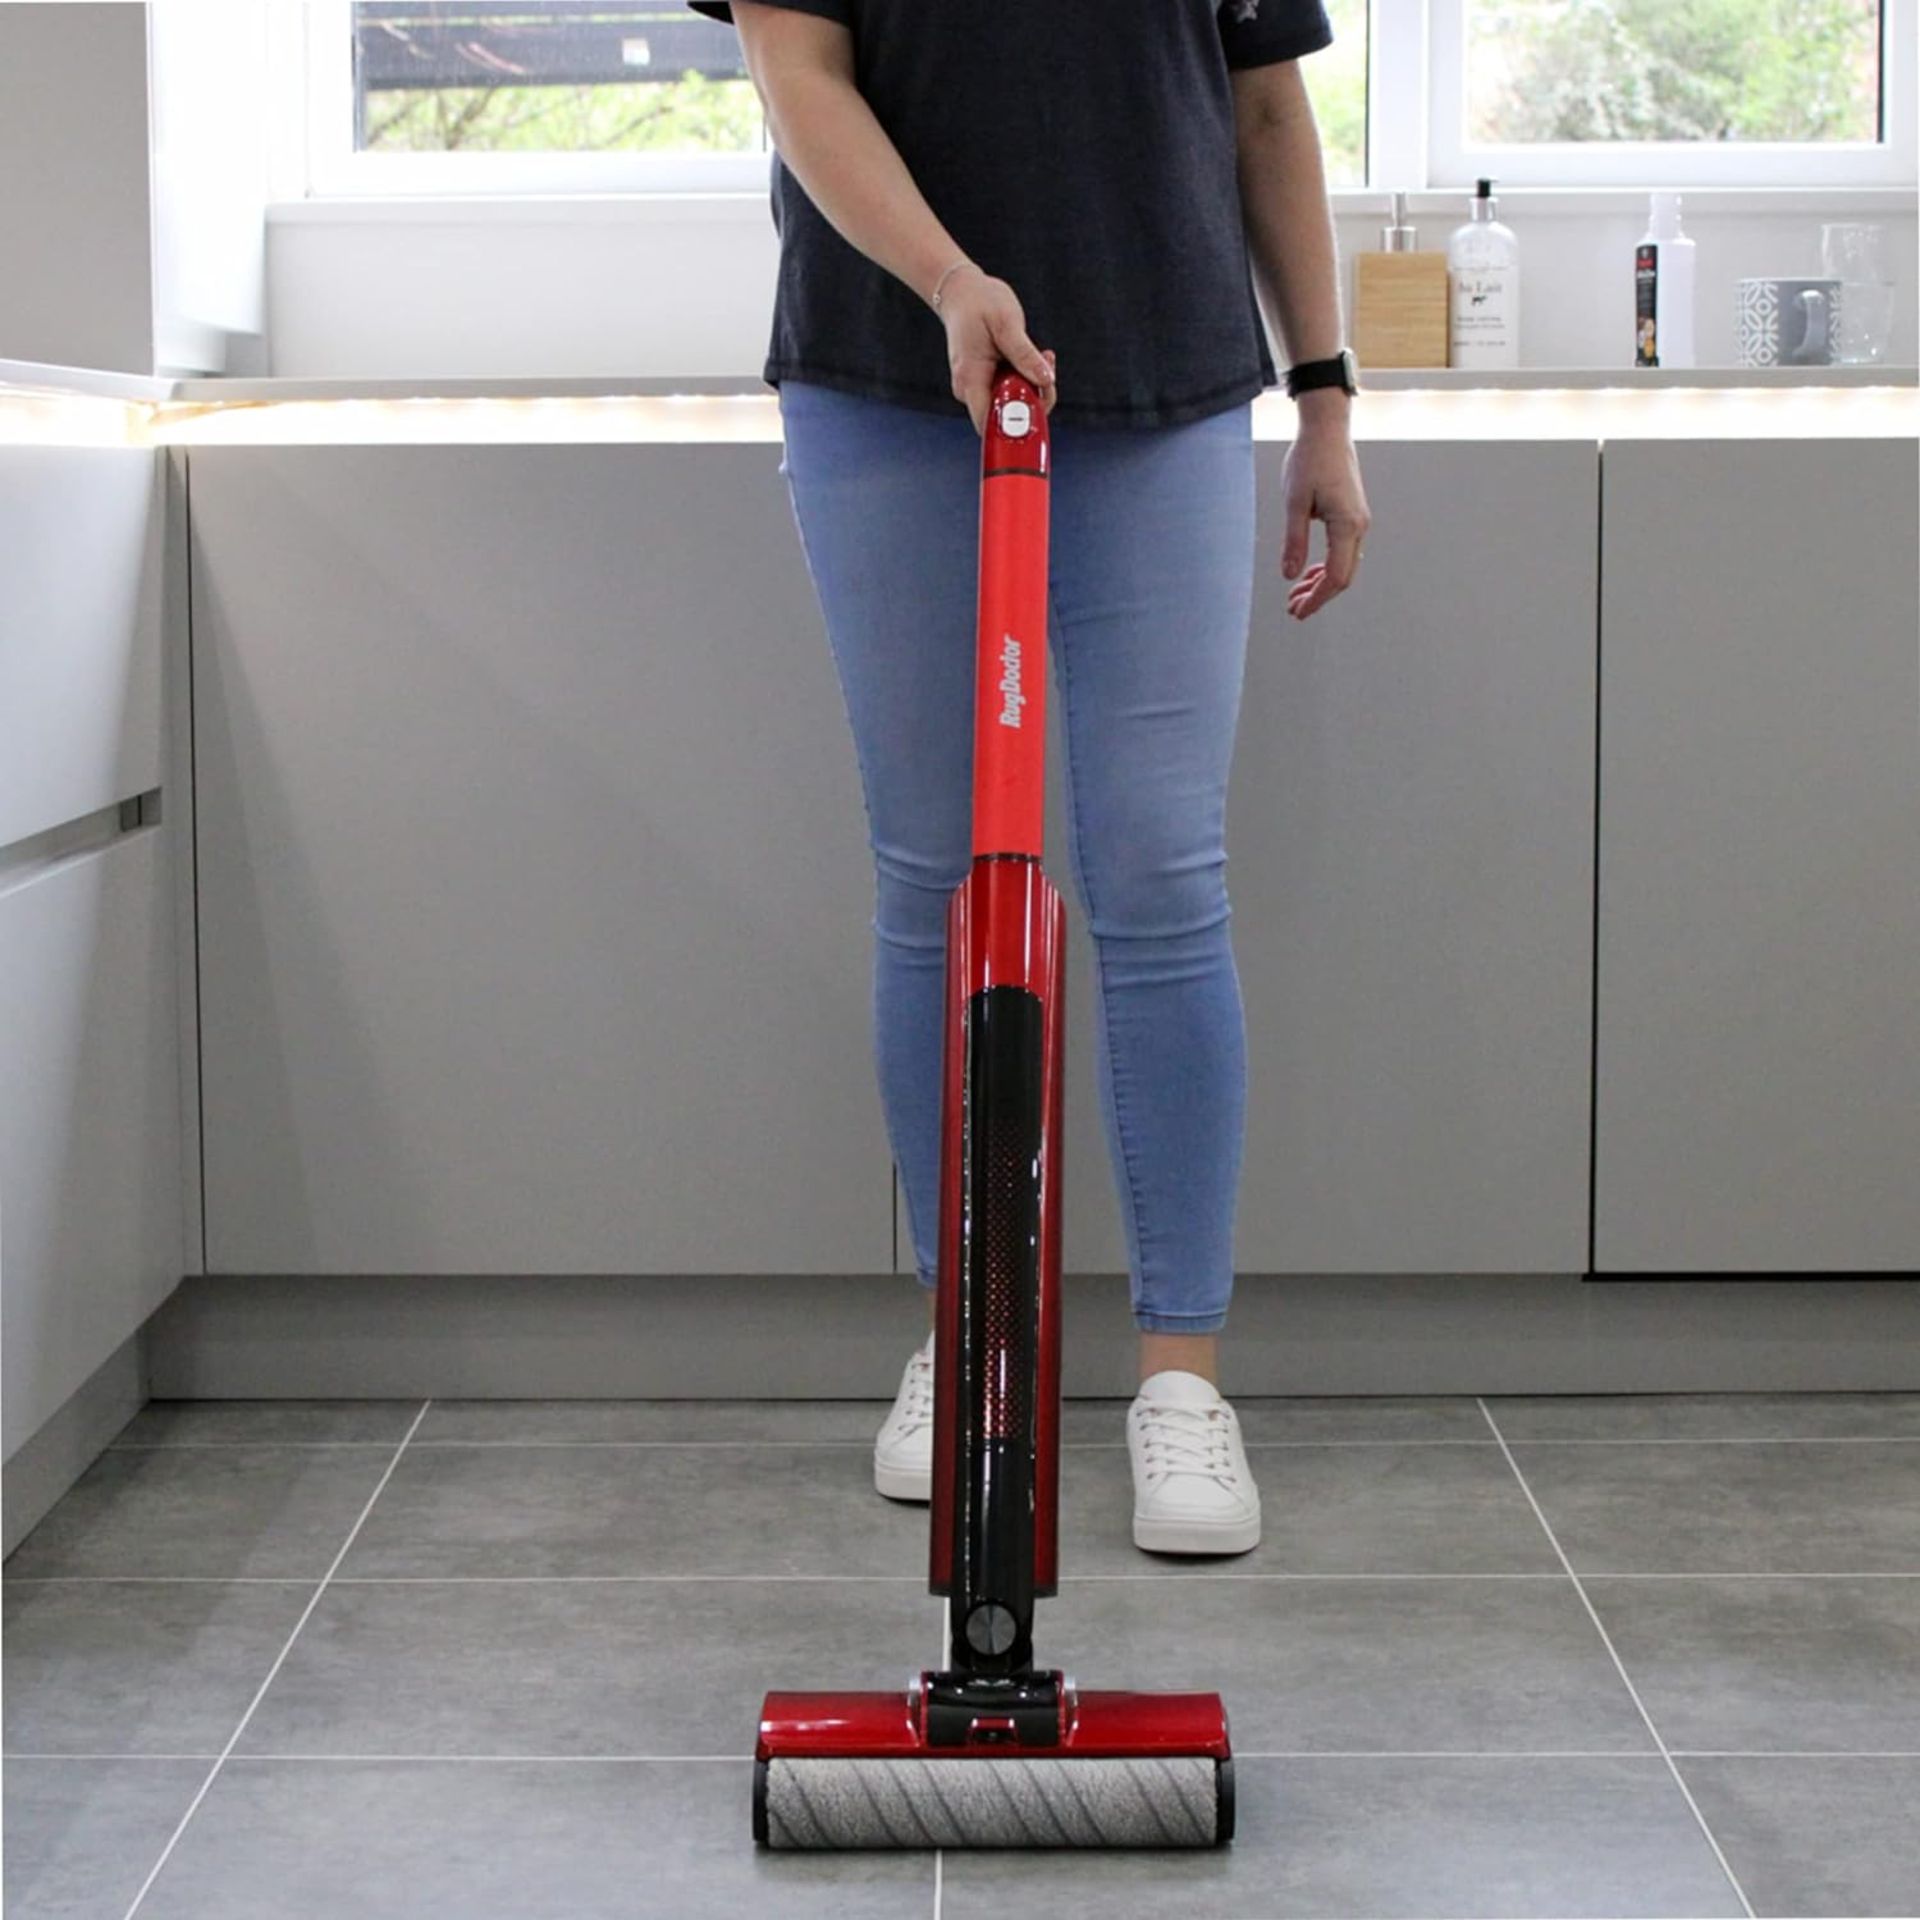 TRADE LOT 5 X BRAND NEW RUG DOCTOR CORDLESS HARD FLOOR CLEANER WITH 6L OF CLEANING SOLUTION (